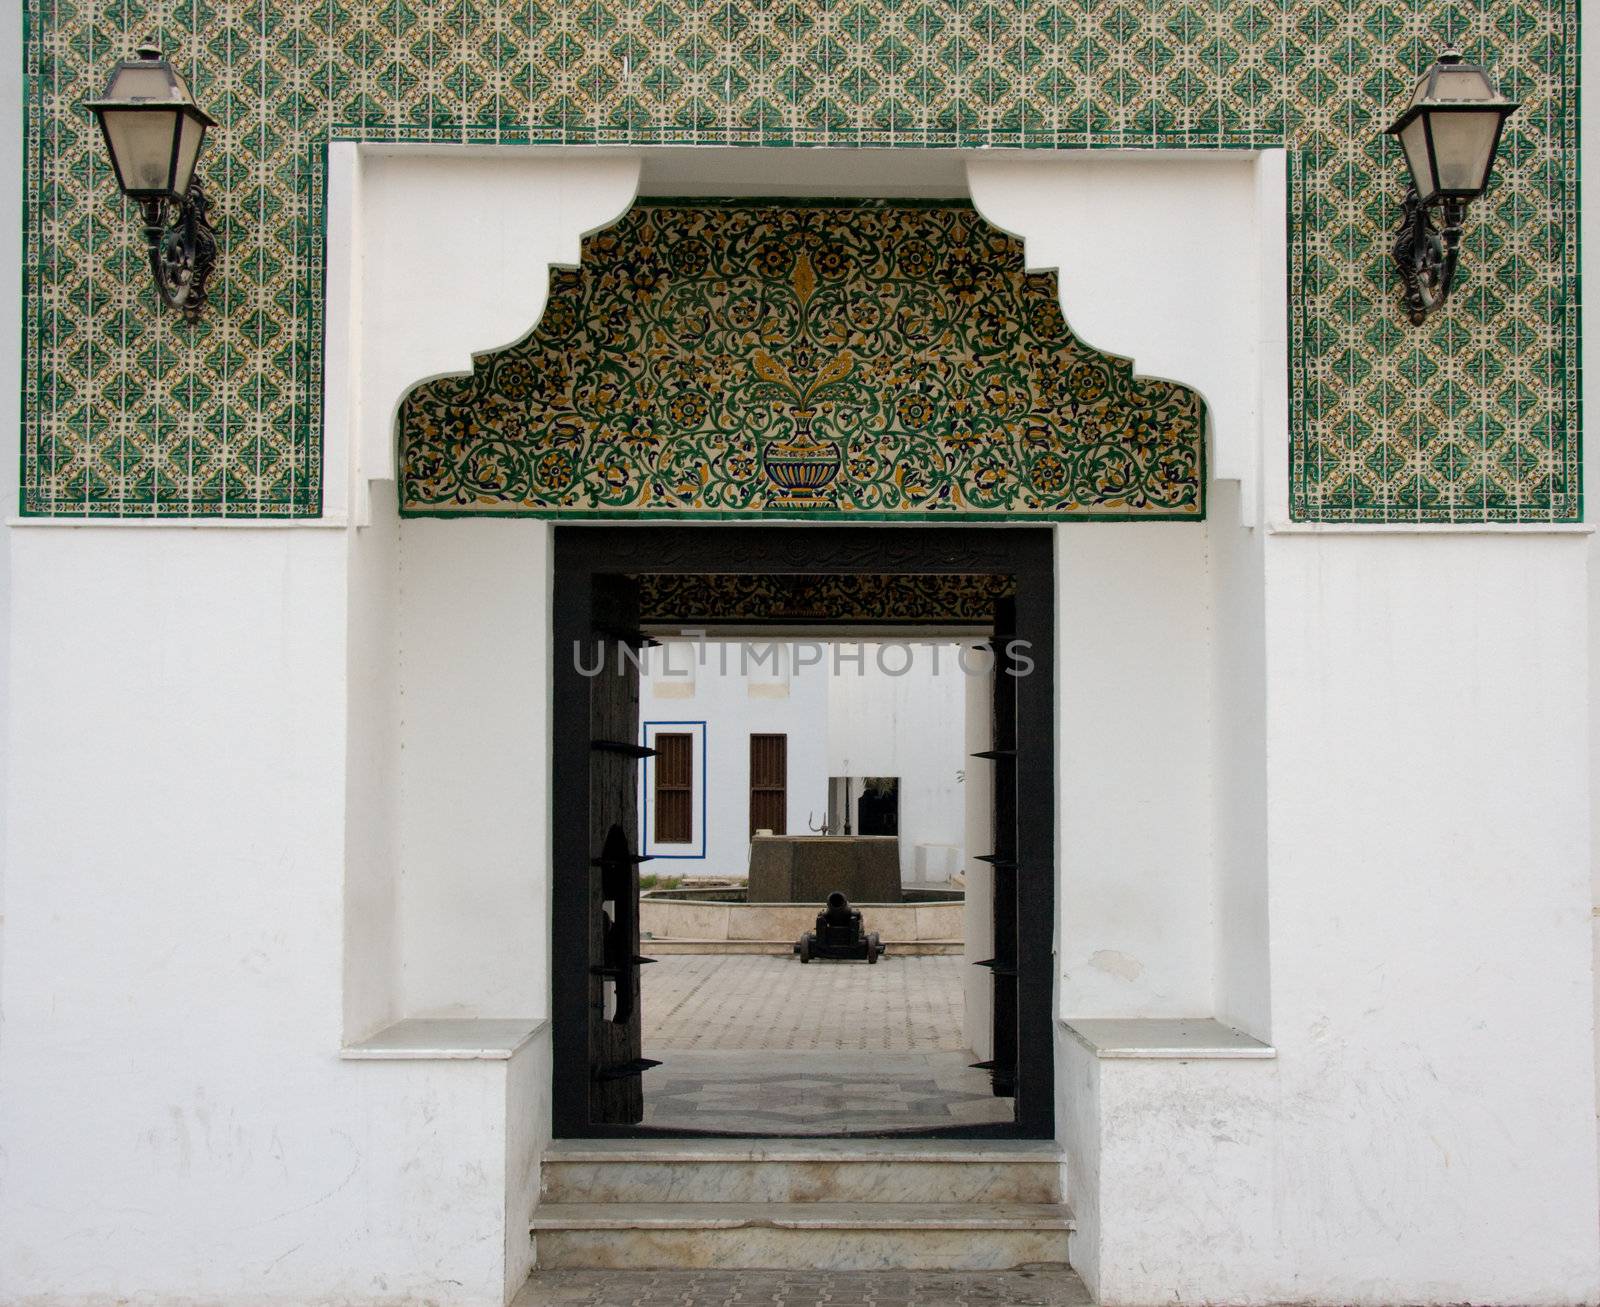 Tiled entrance to fort in Abu Dhabi in UAE with antique lamps